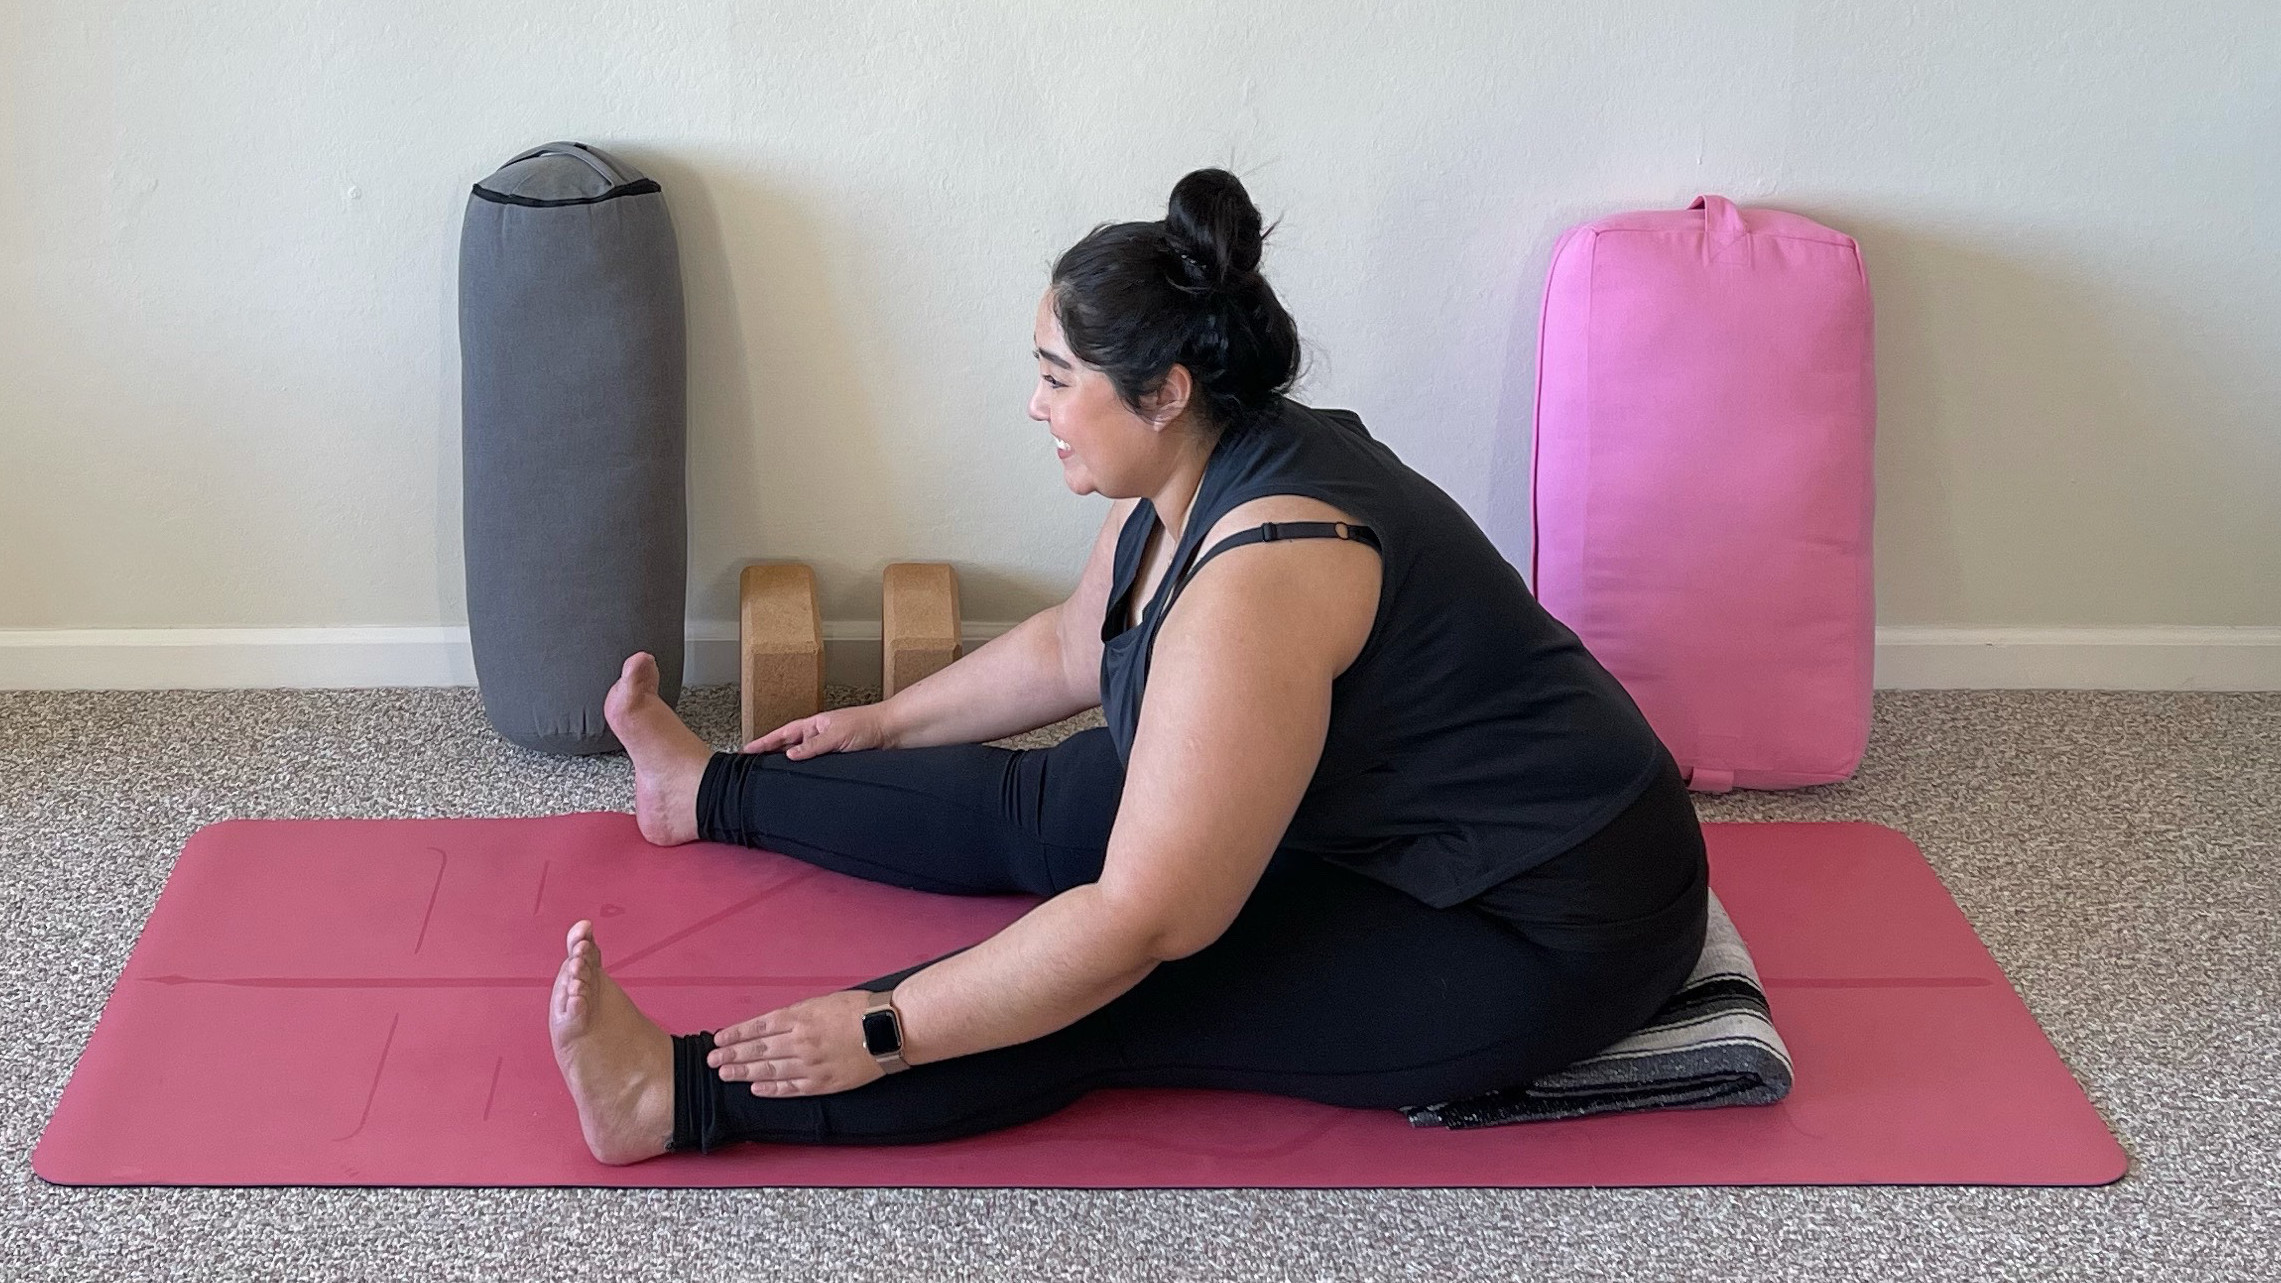 Pigeon pose: Modifications & variations for plus size bodies